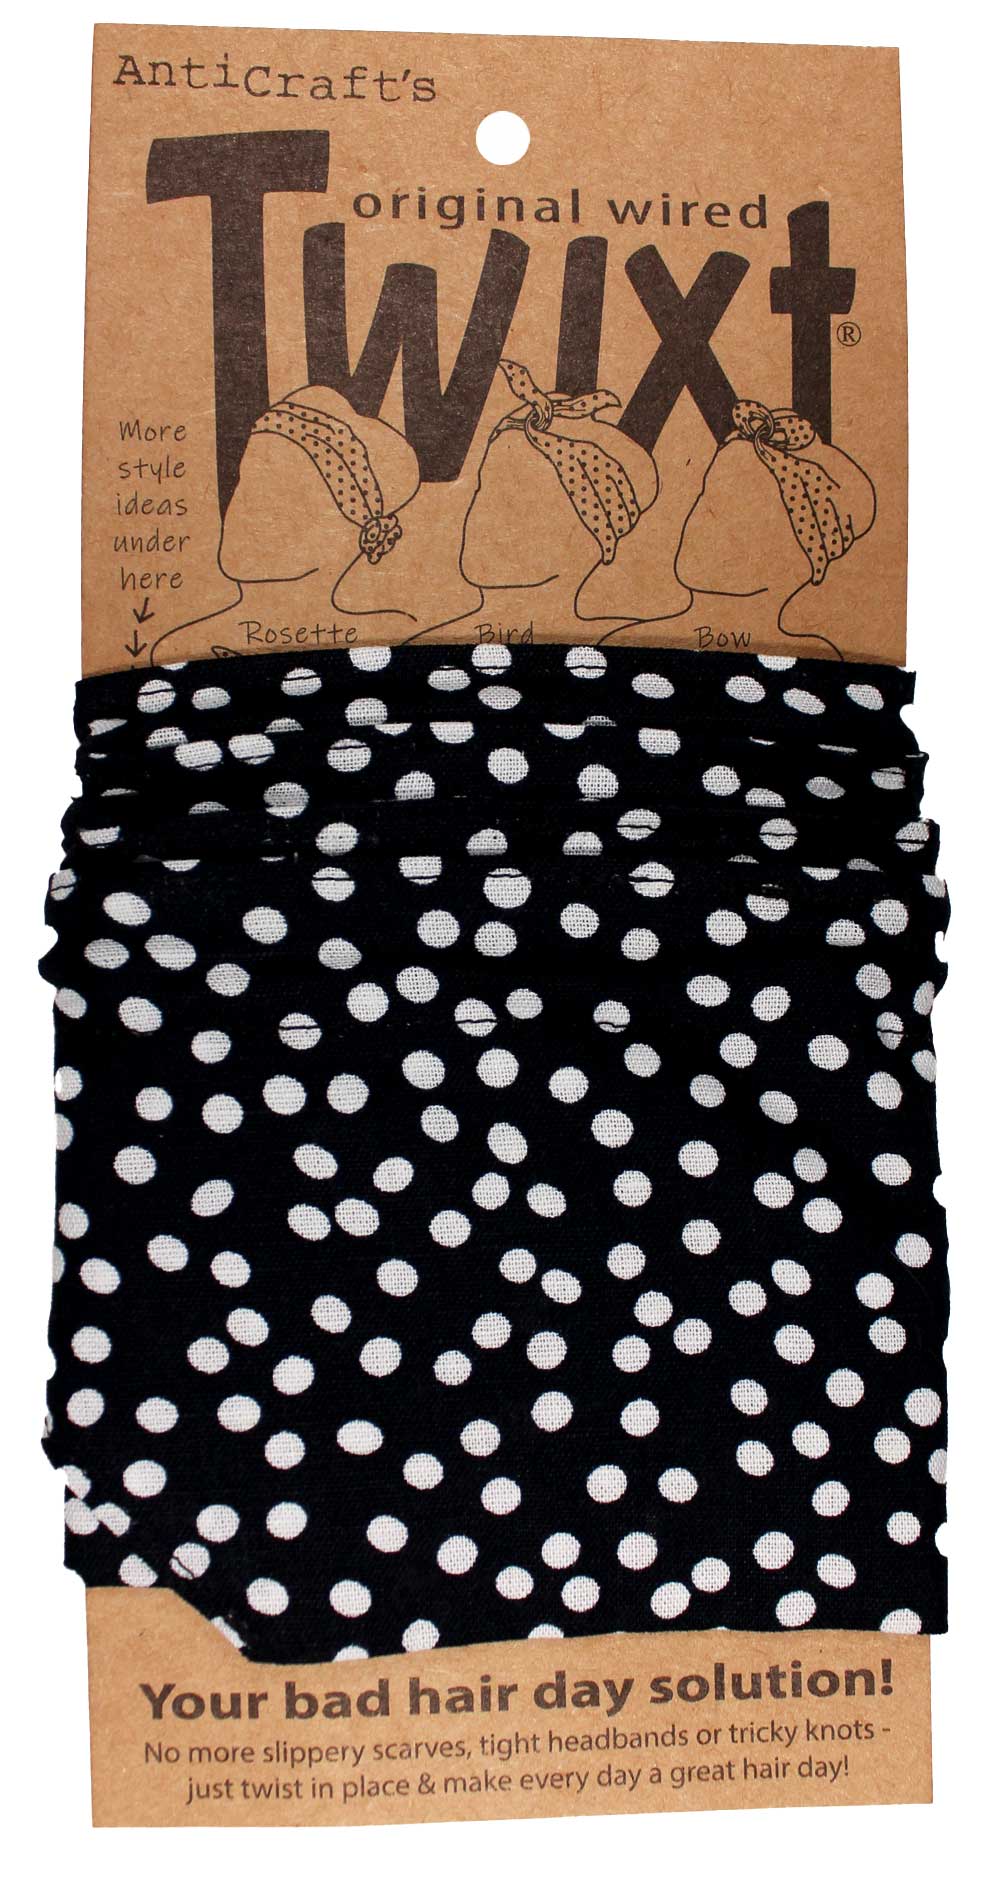 Messy Dots on Black - Twixt / Wired Head Wrap